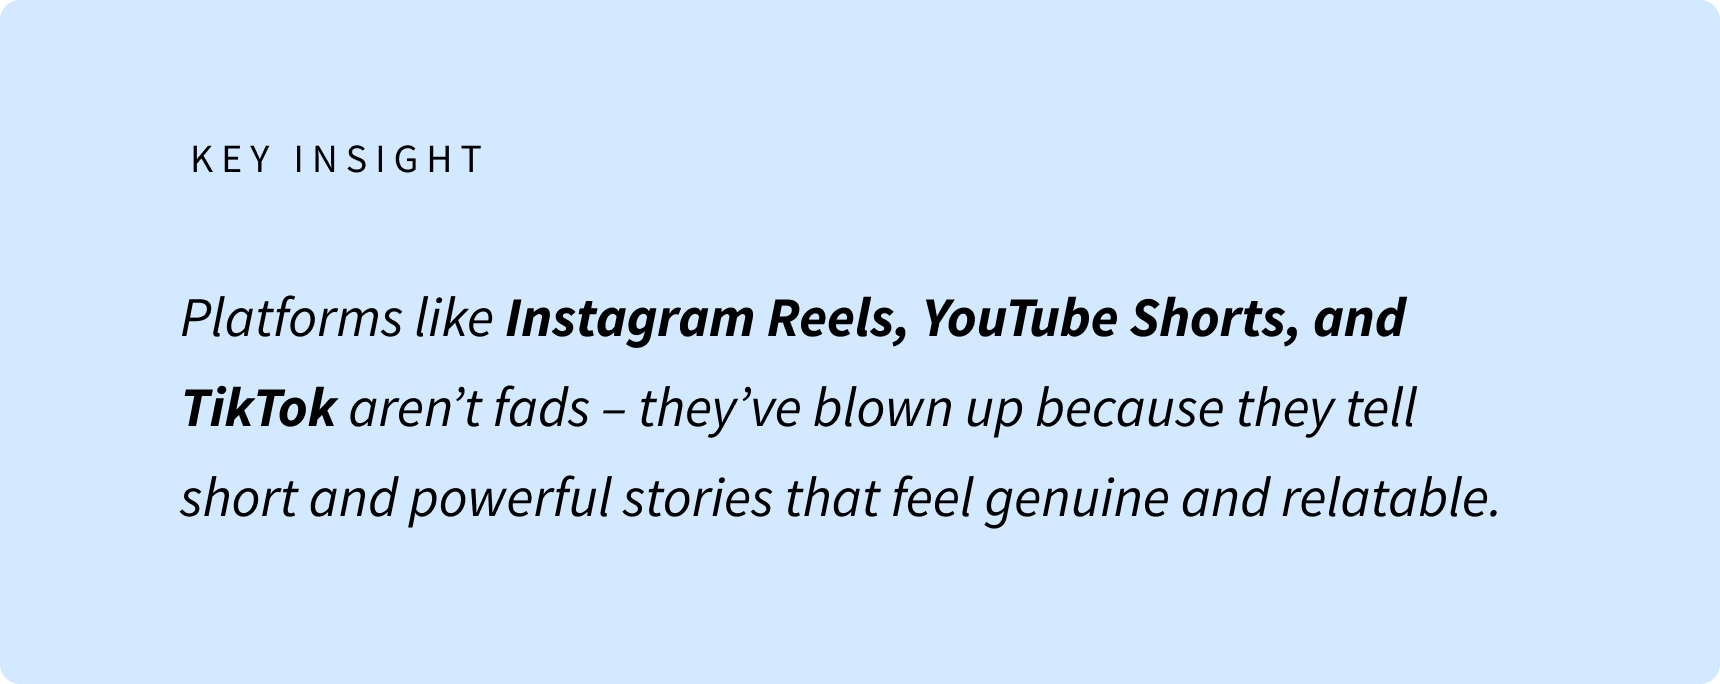 PLatforms like Instagram Reel, YouTube Shorts, and TikTok aren't fads - they've blown up because they tell short and powerful stories that feel genuine and relatable